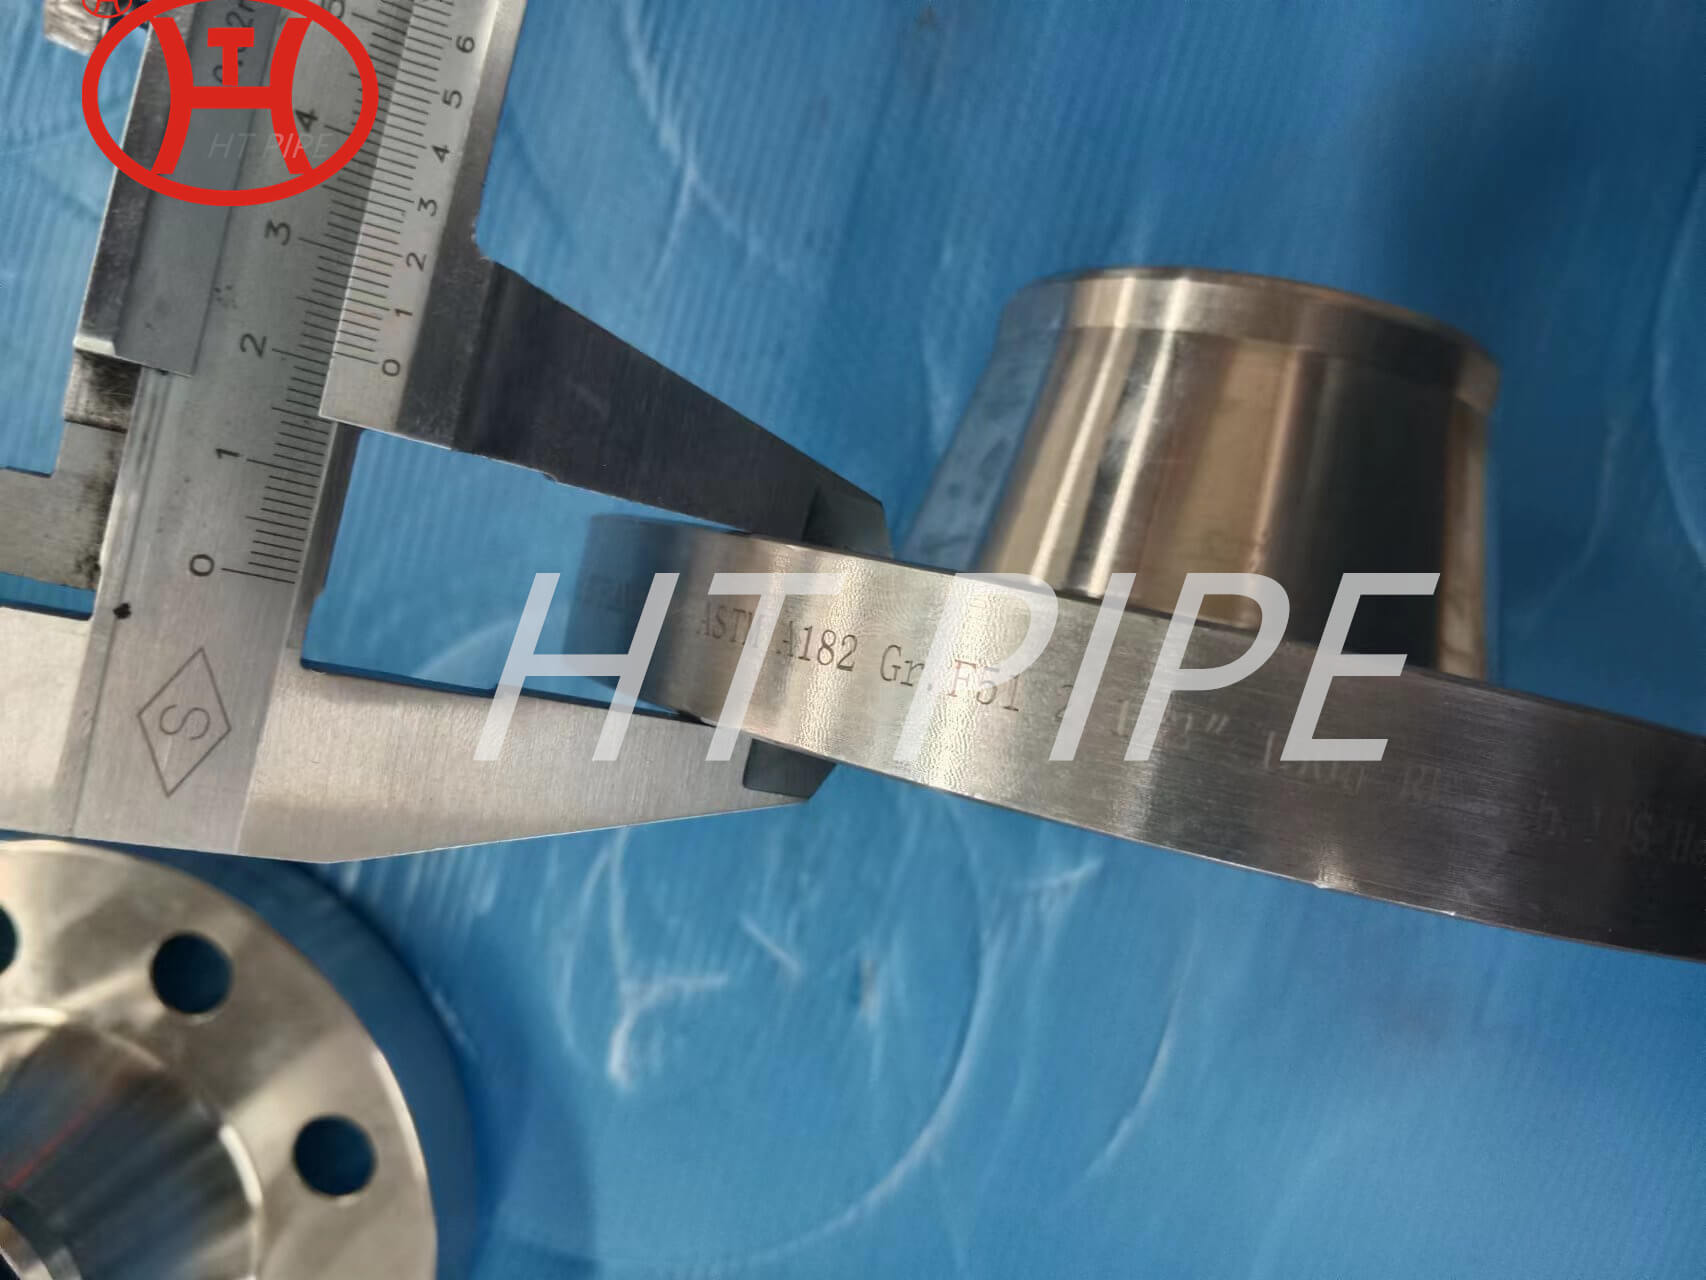 Stainless Steel 904L Slip On Flanges